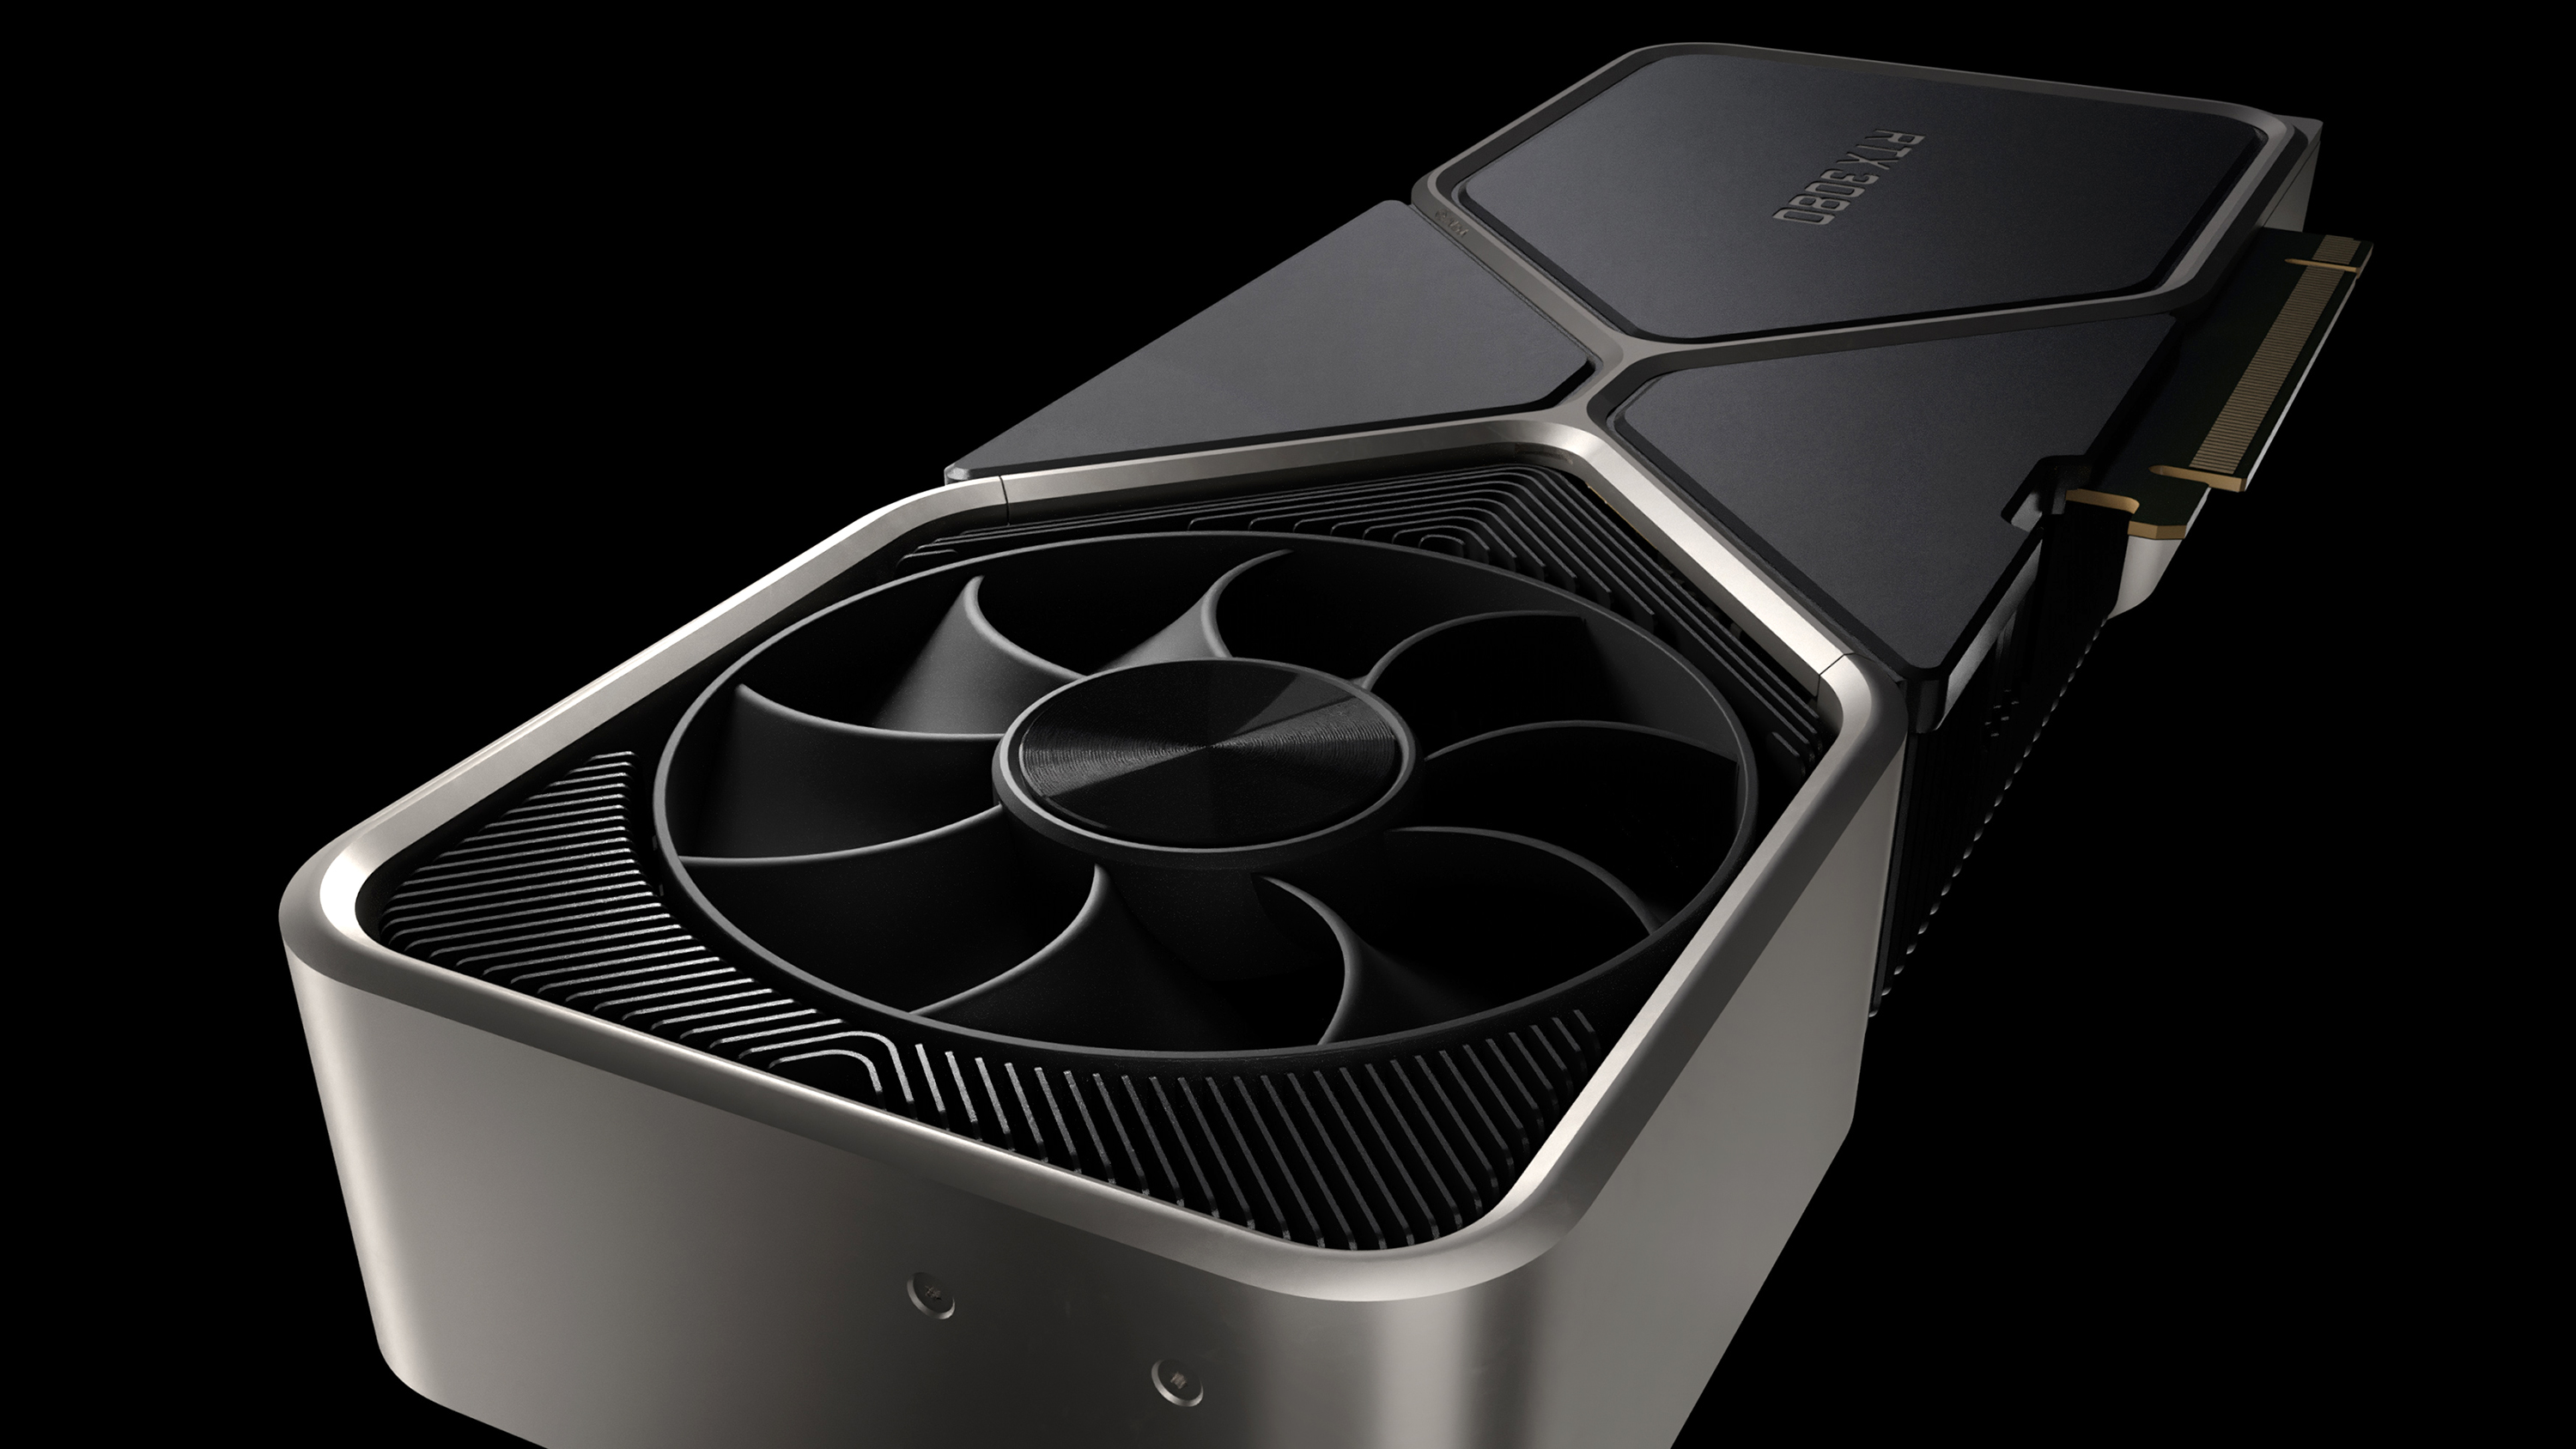 Nvidia Corp.’s GeForce RTX 3080 Ti has had some capabilities&nbsp;deliberately&nbsp;stripped out in order to remain the exclusive preserve of its core gamer customer base.